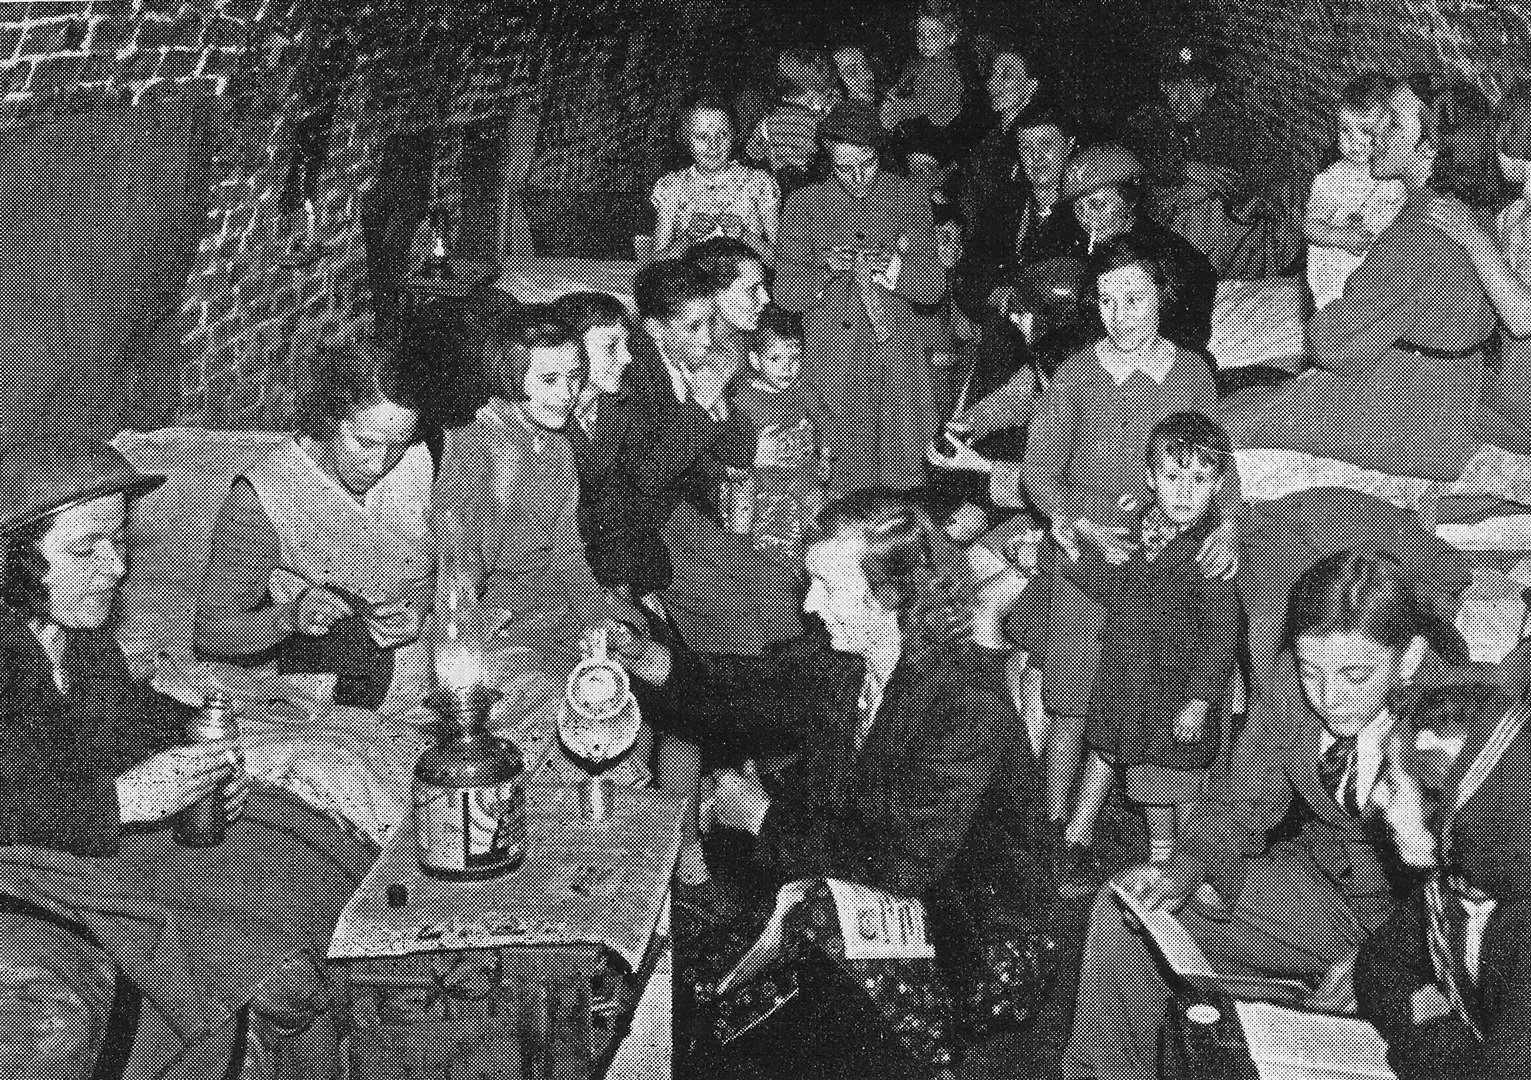 Families slept safely in Northfleet tunnels during the Battle of Britain